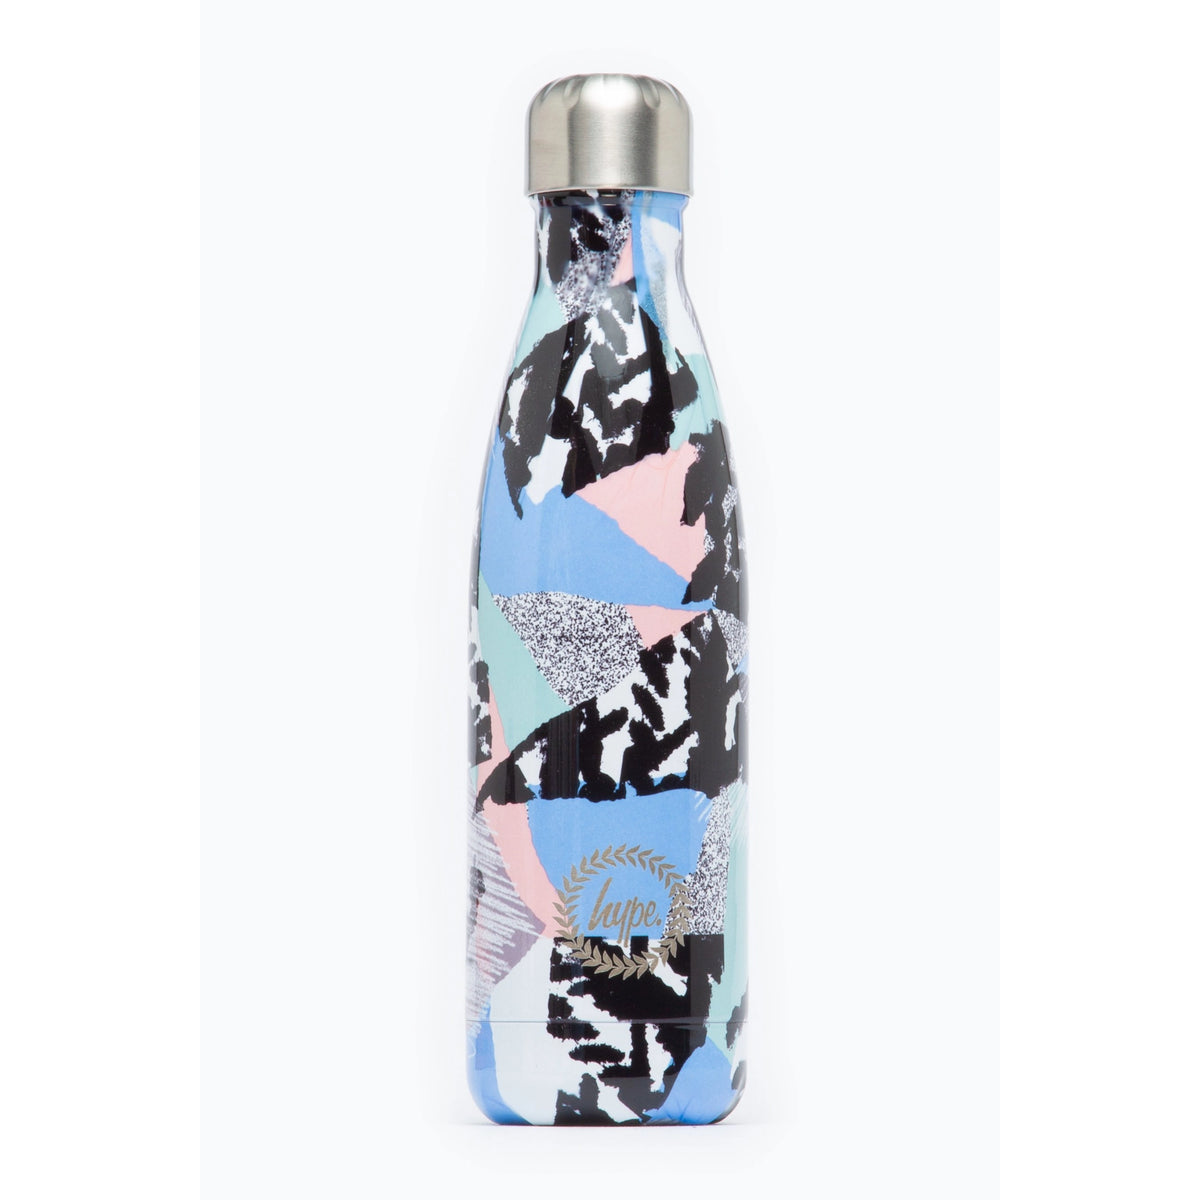 Hype Pastel Abstract Metal Water Bottle - personalisation optional!